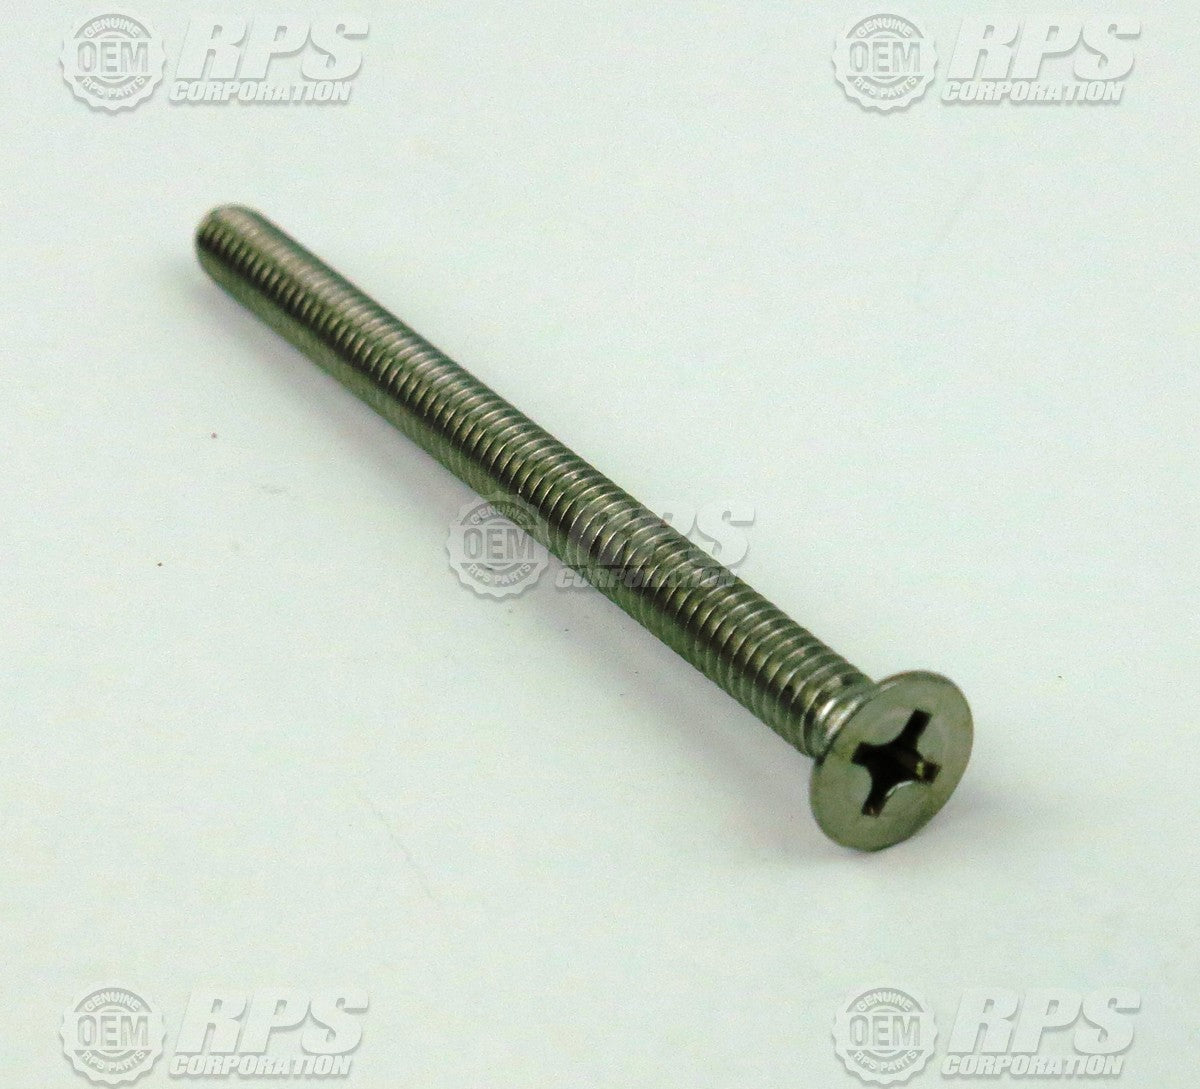 FactoryCat/Tomcat H-0170133, Screw,PFHM,1/4-20x3-1/2" Stainless by marco